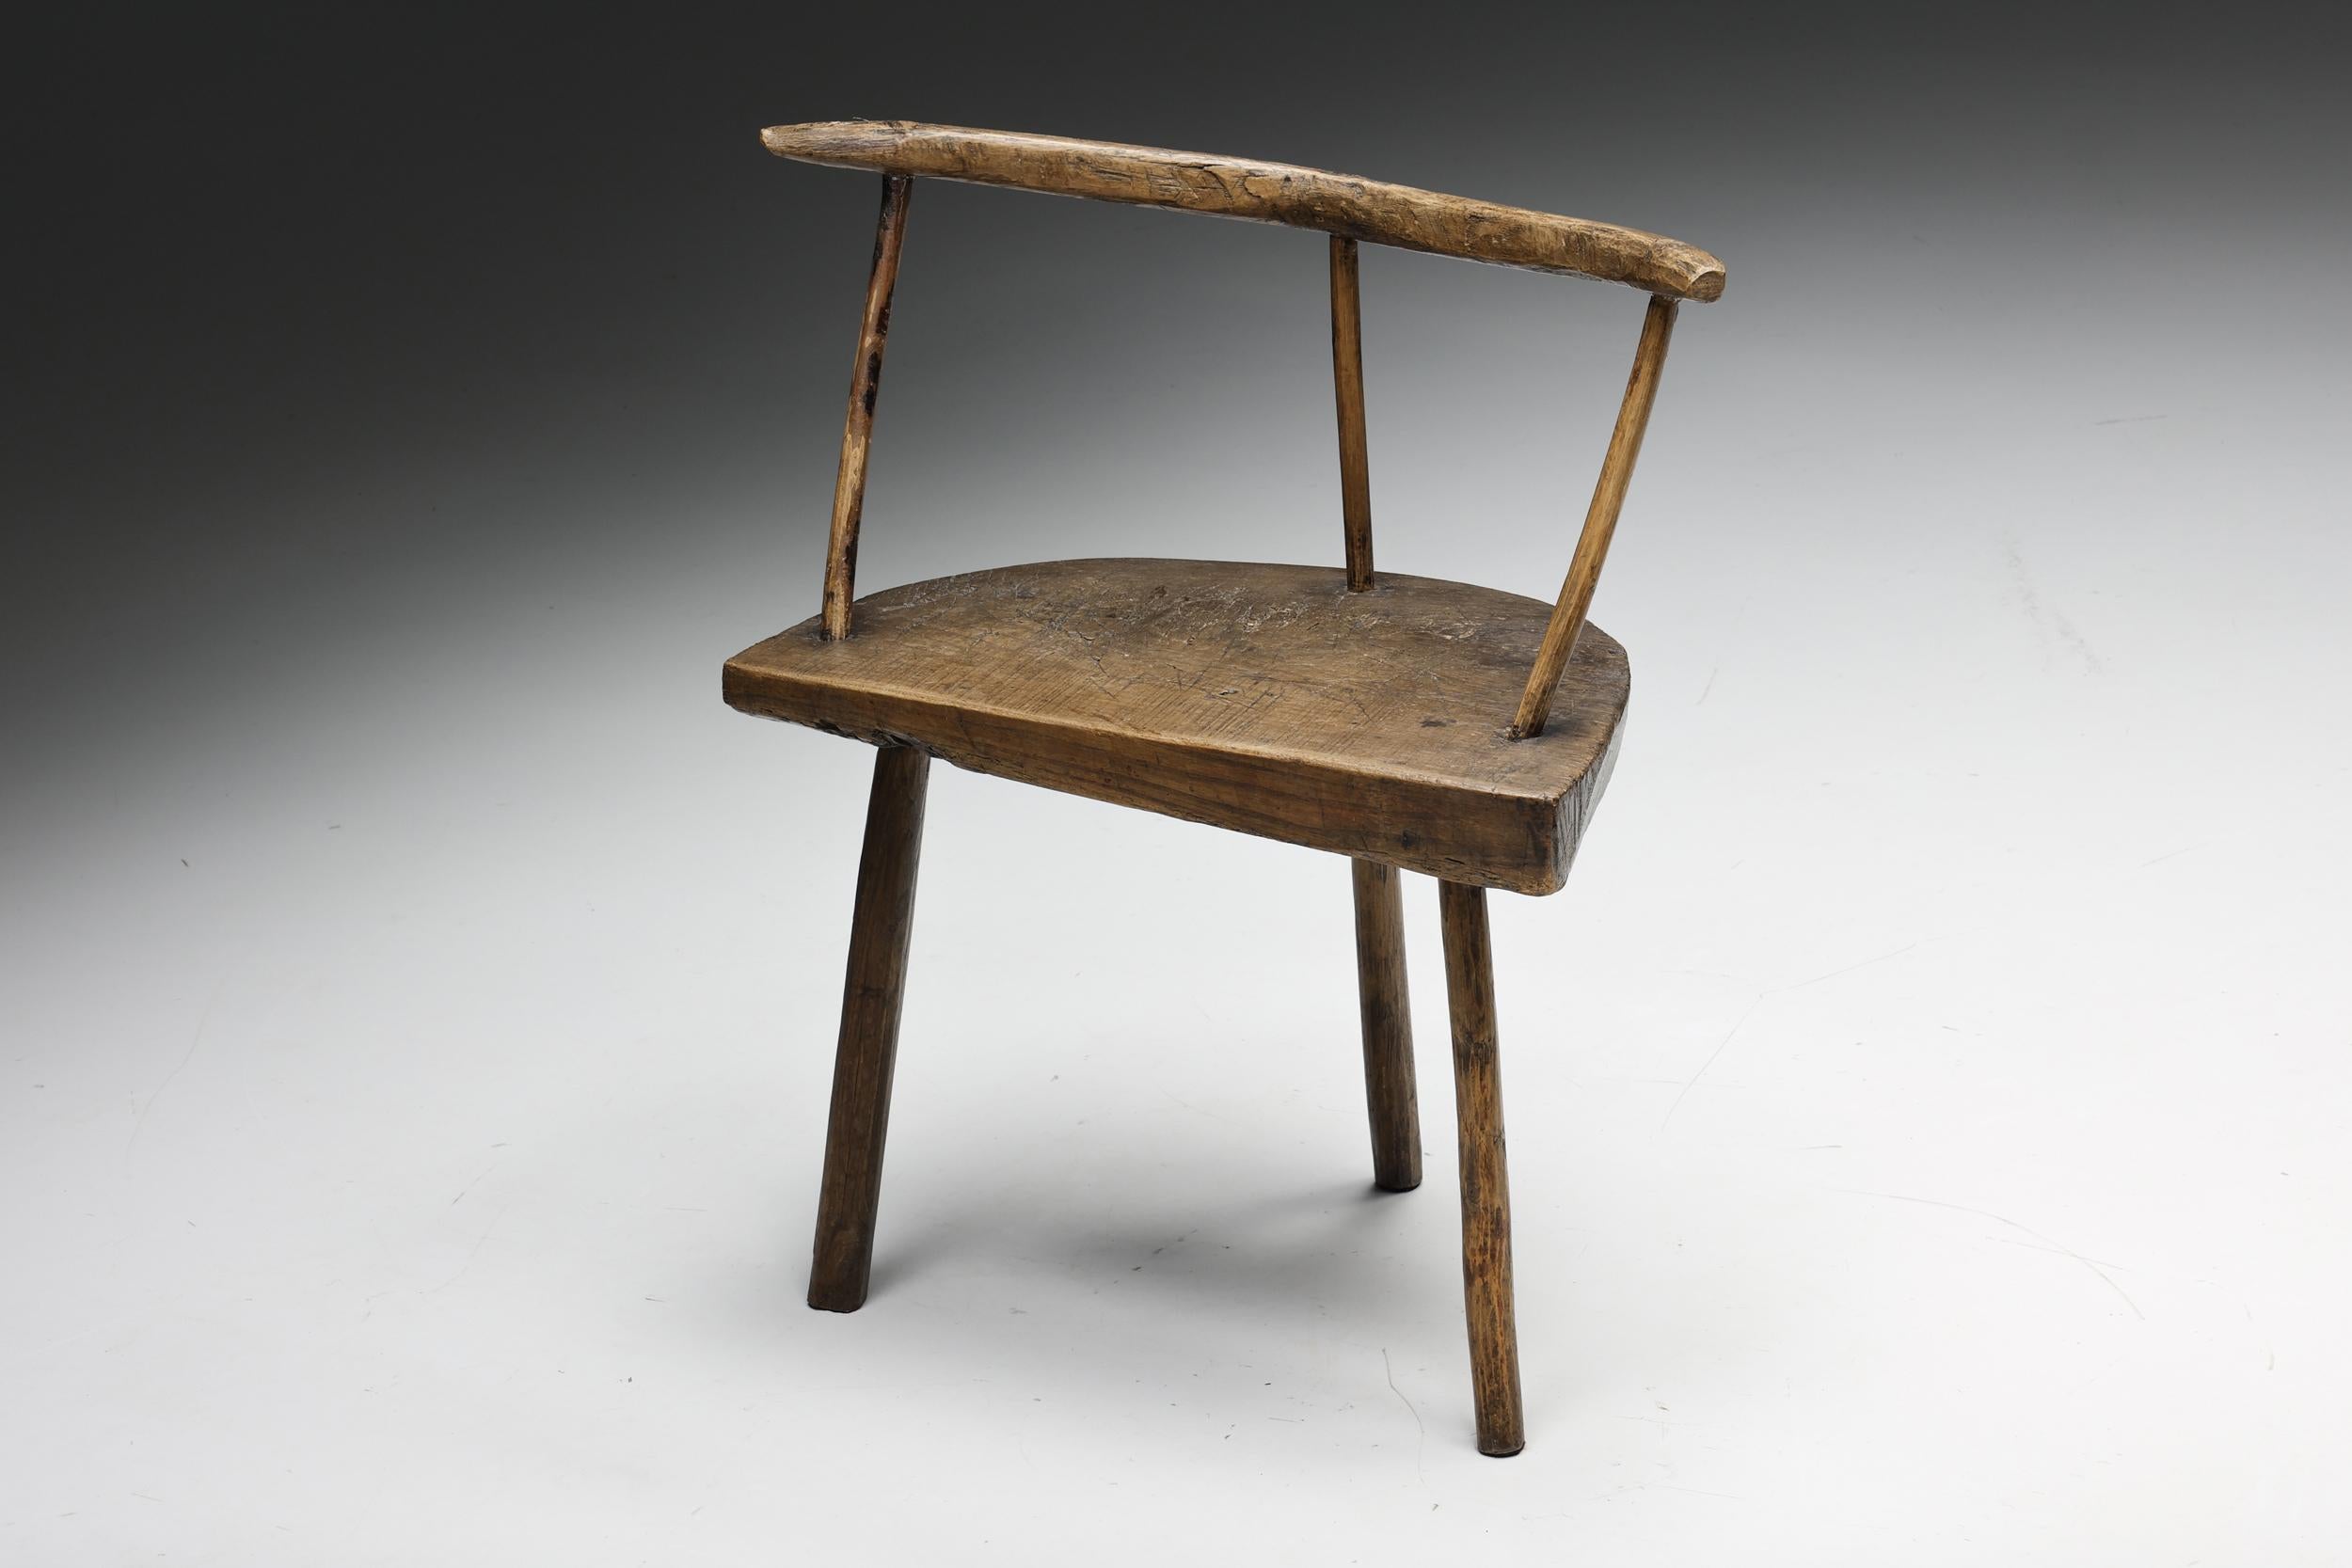 Sculptural; Rustic; Robust; Rural; Wabi Sabi; Organic Modern; Travail Populaire; Folk Art; Travail Art Populaire; Chair; Side Chair; Wood; France; French; Organic; Luxury Chalet Style; Wood; Tripod; Three-Legged; 

Sculptural organic modern